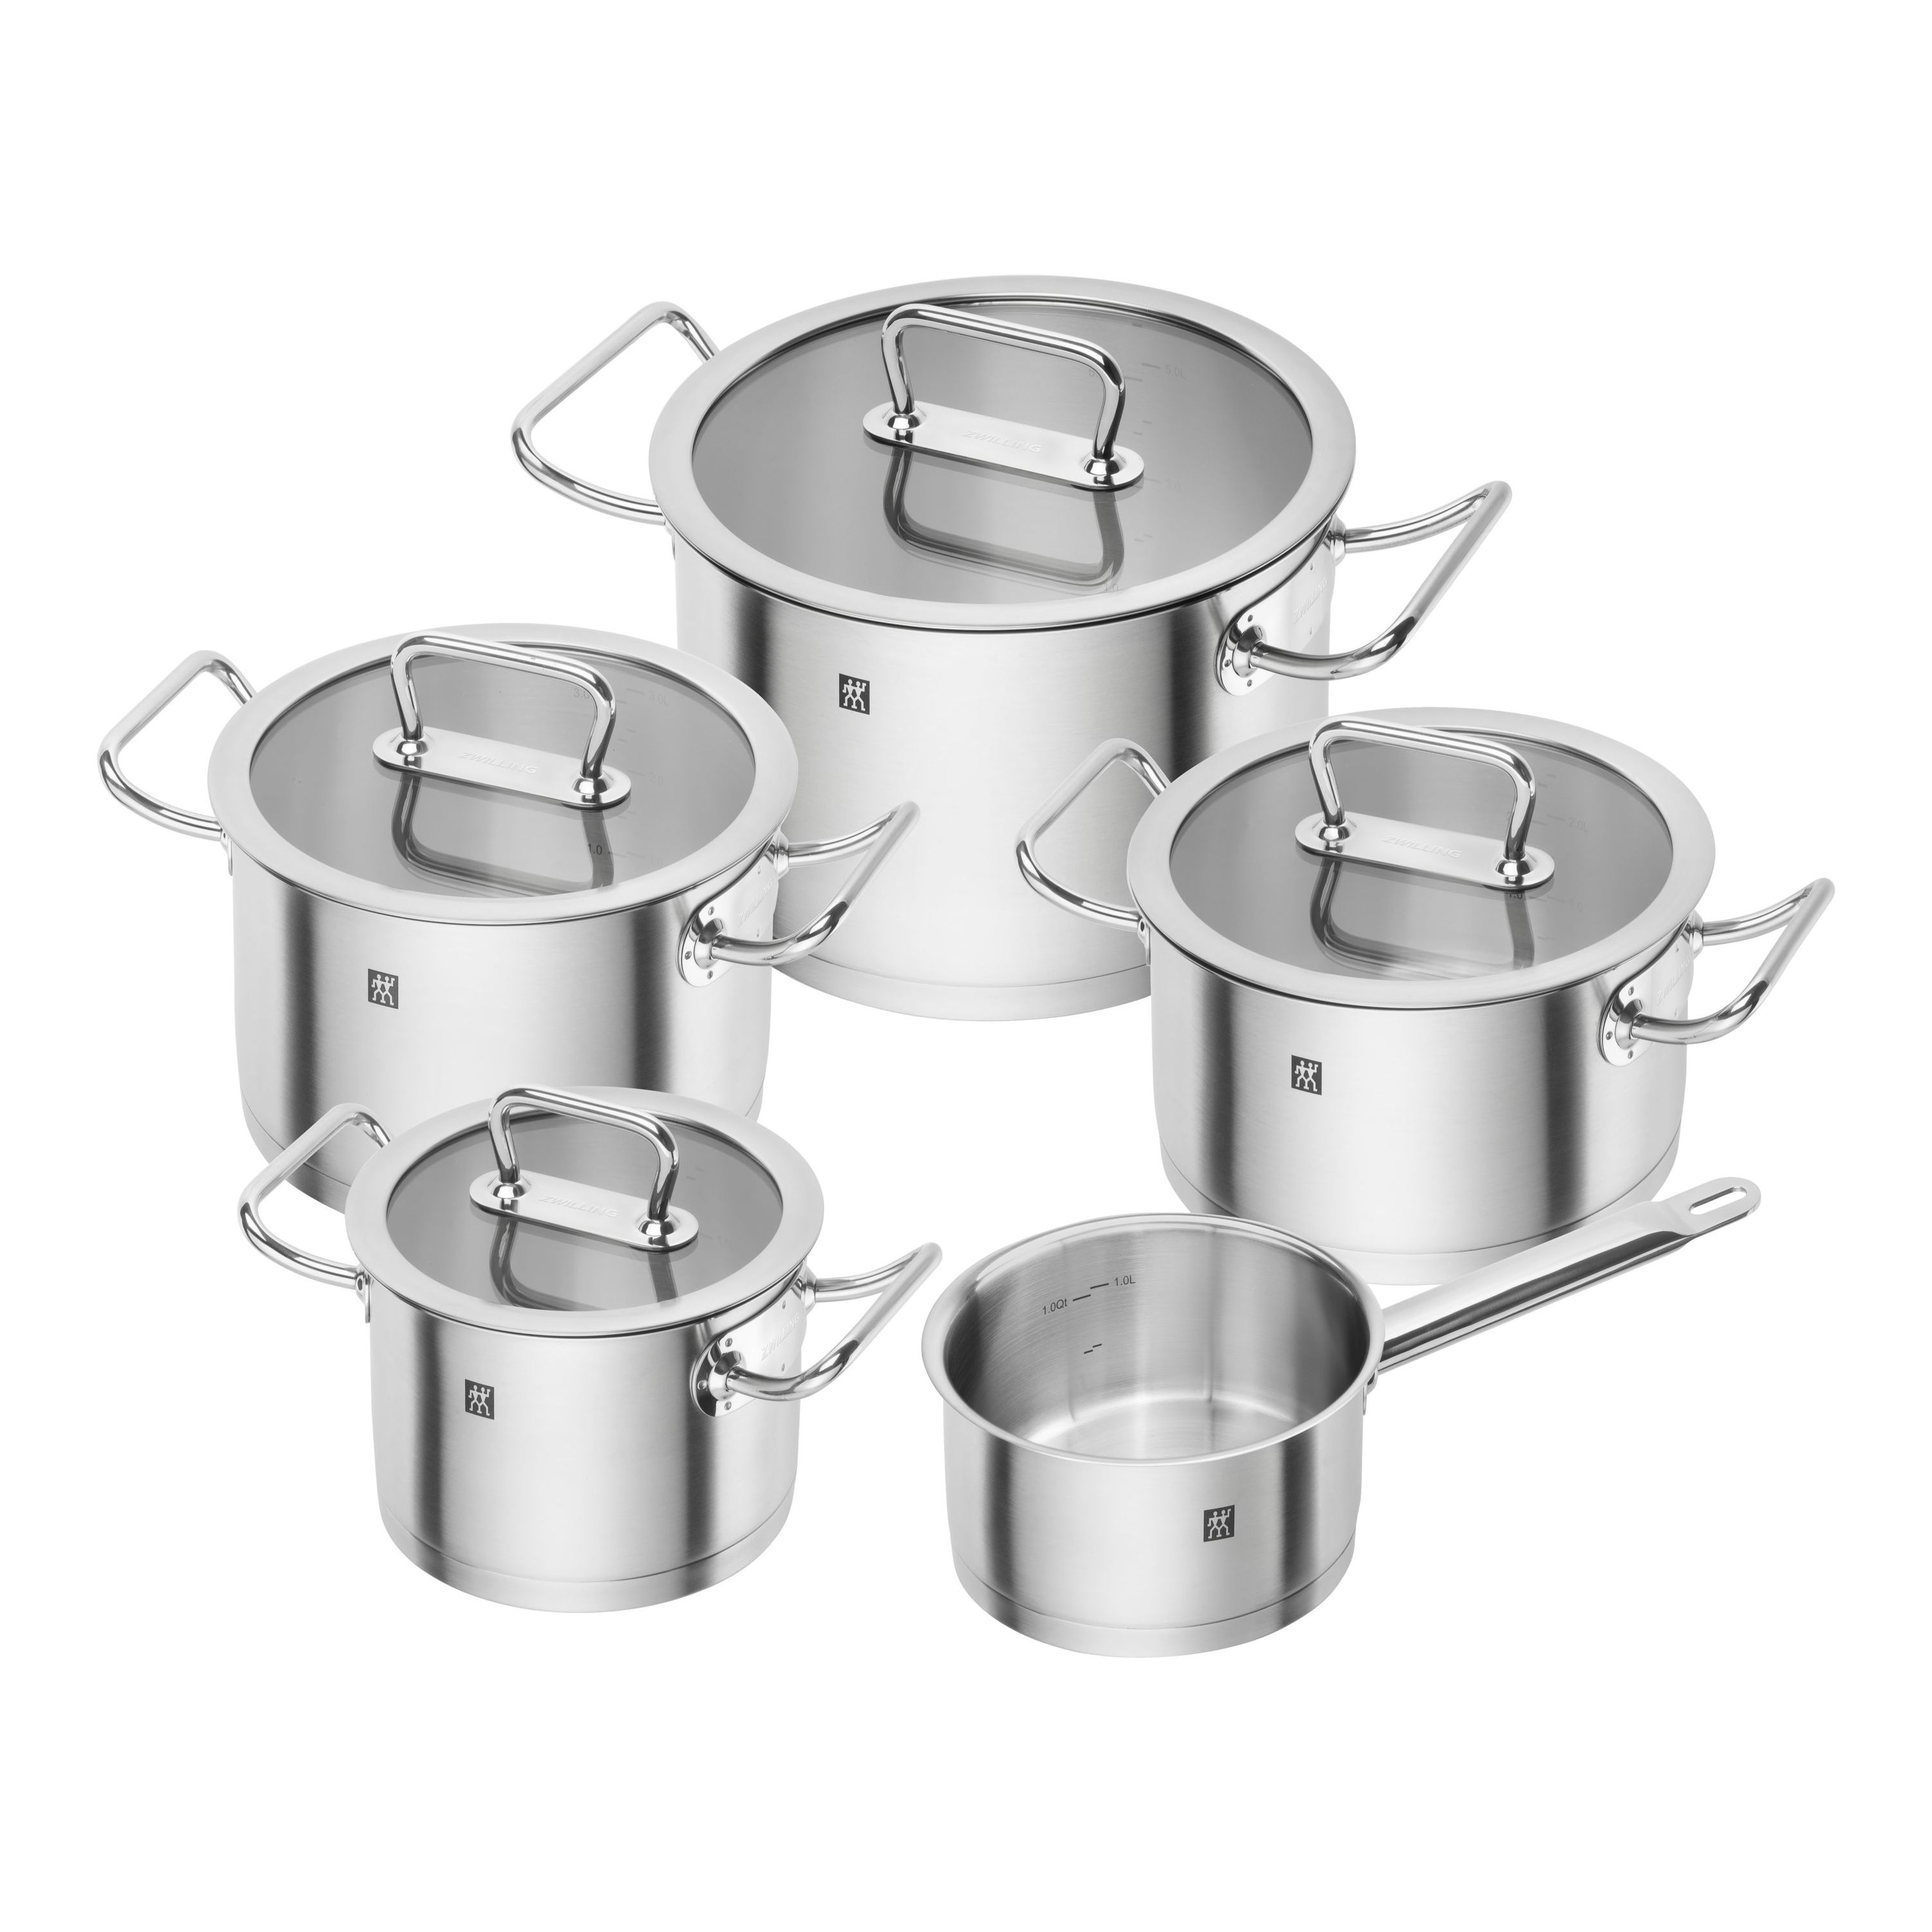 https://www.zwilling.com/on/demandware.static/-/Sites-zwilling-master-catalog/default/dw8a3b9b87/images/large/64120005.jpg